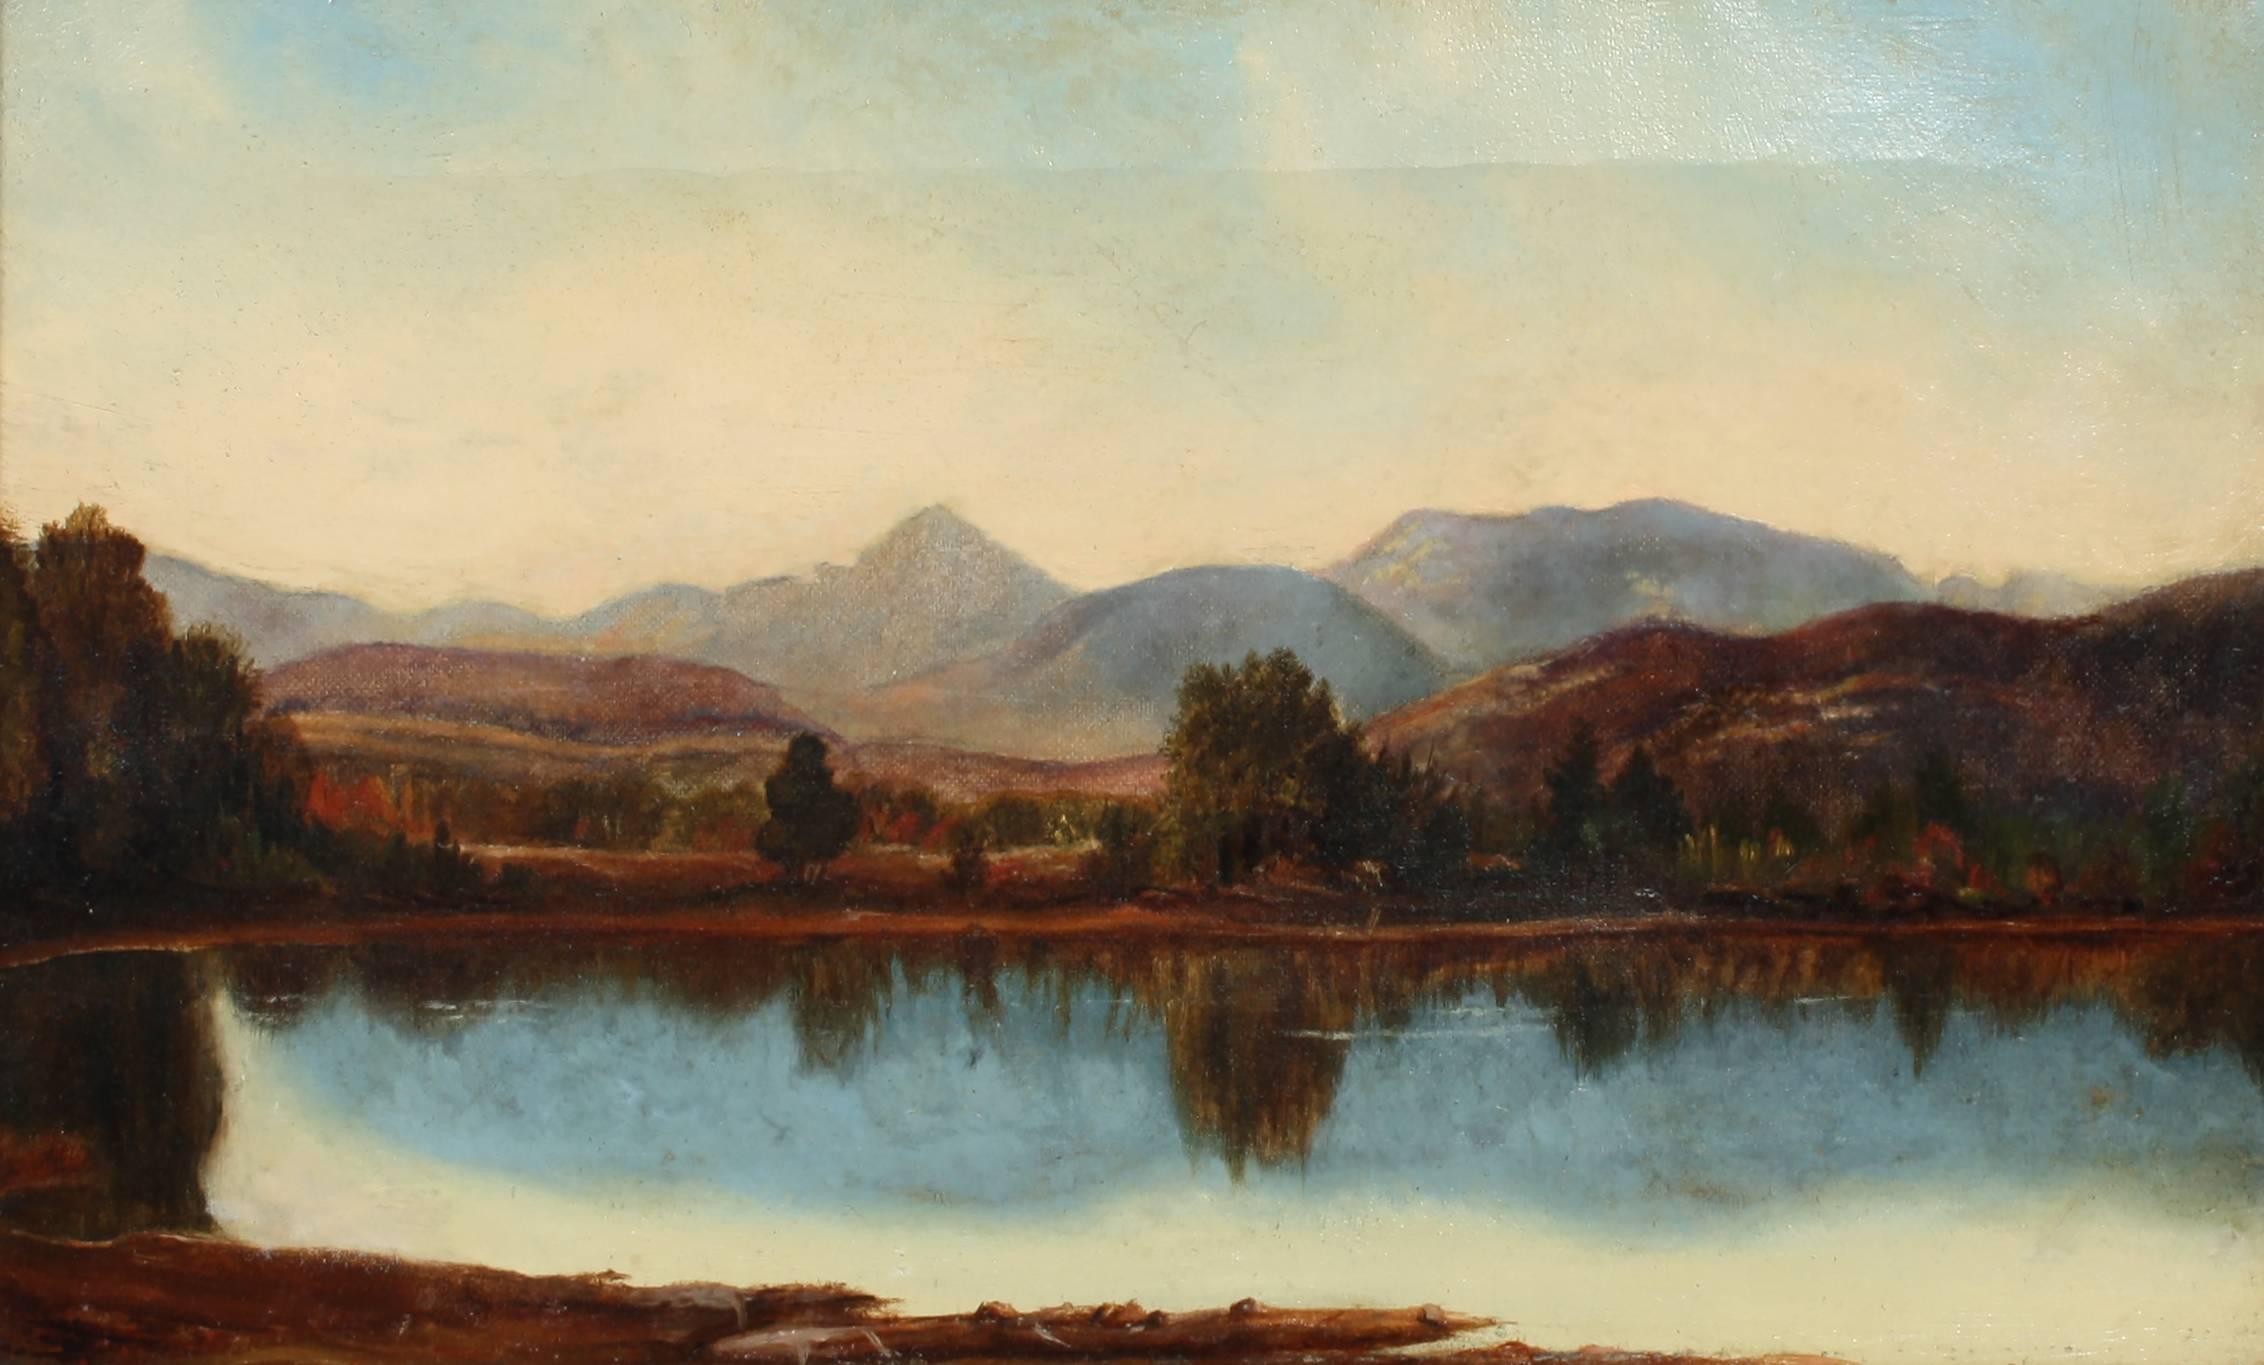 Unknown Landscape Painting - Reflections Over a Cool Lake